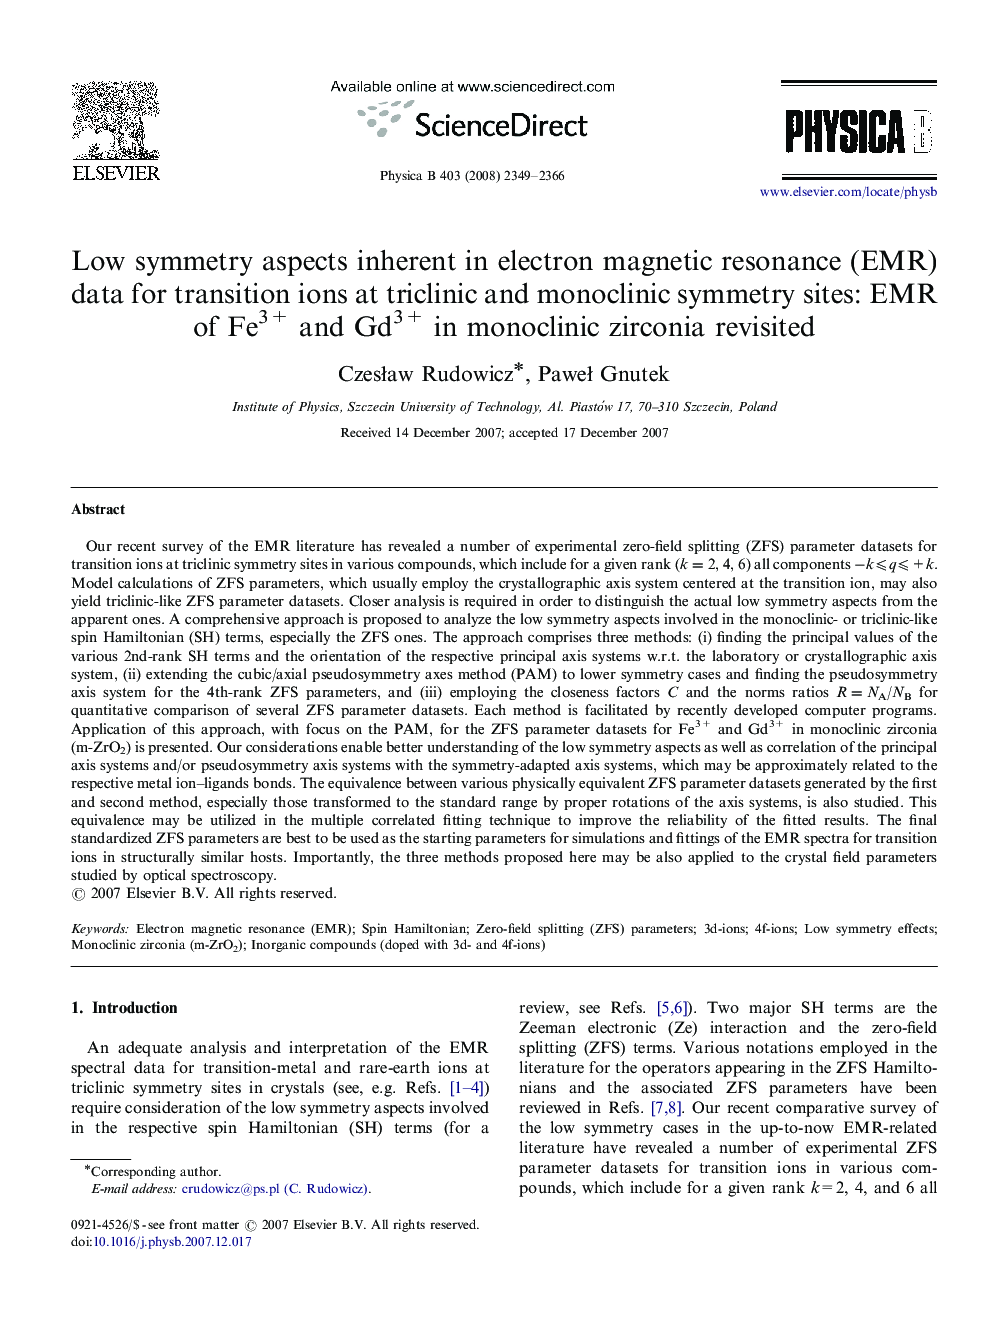 Low symmetry aspects inherent in electron magnetic resonance (EMR) data for transition ions at triclinic and monoclinic symmetry sites: EMR of Fe3+ and Gd3+ in monoclinic zirconia revisited